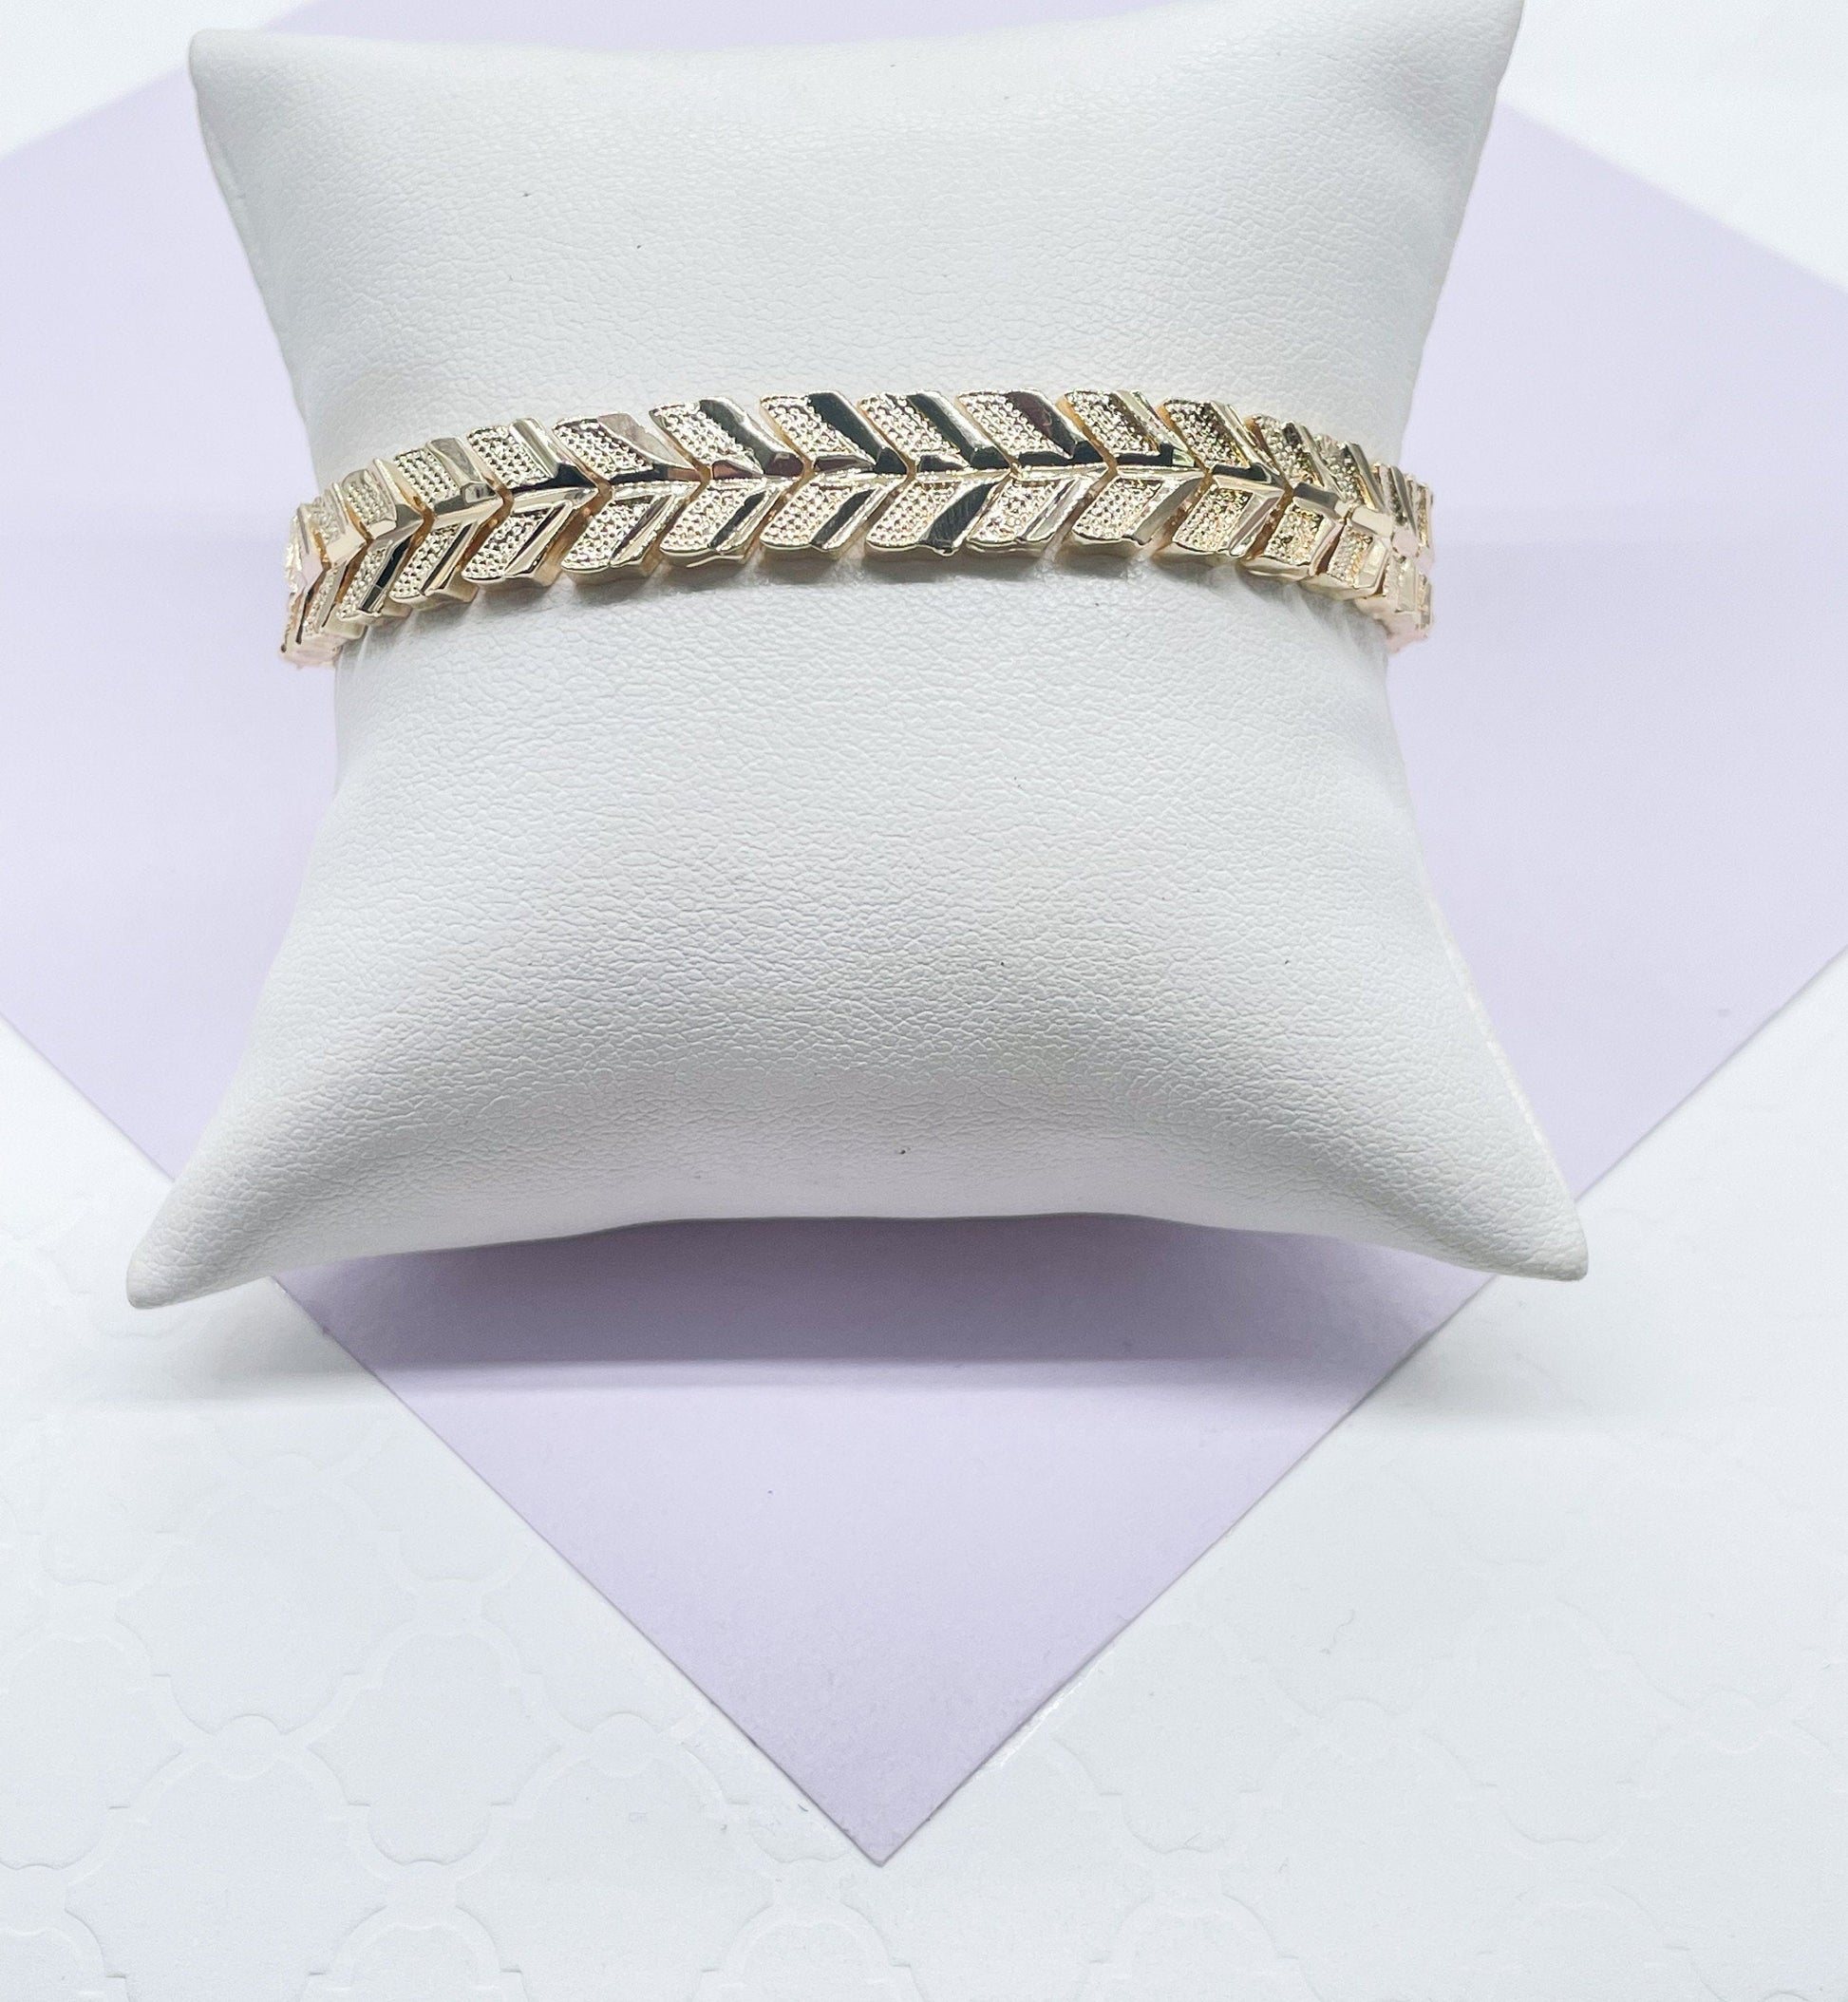 18k Gold Filled Textured And Smooth Patterned Arrow Bracelet